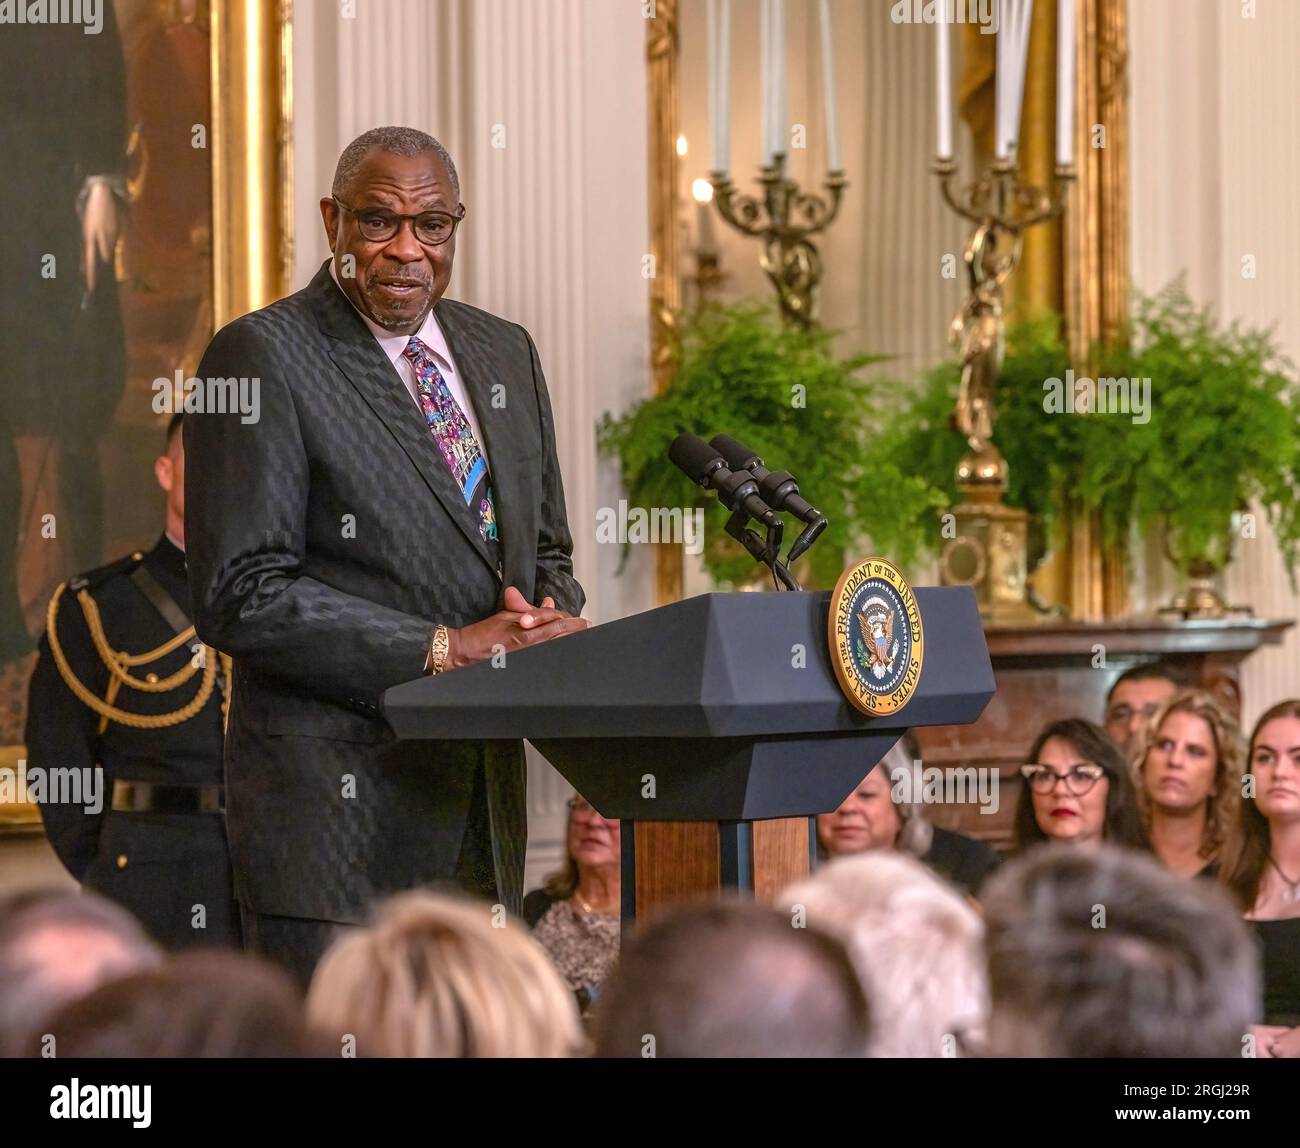 WASHINGTON, D.C. — August 7, 2023: Houston Astros manager Dusty Baker delivers remarks in the East Room of the White House. Stock Photo